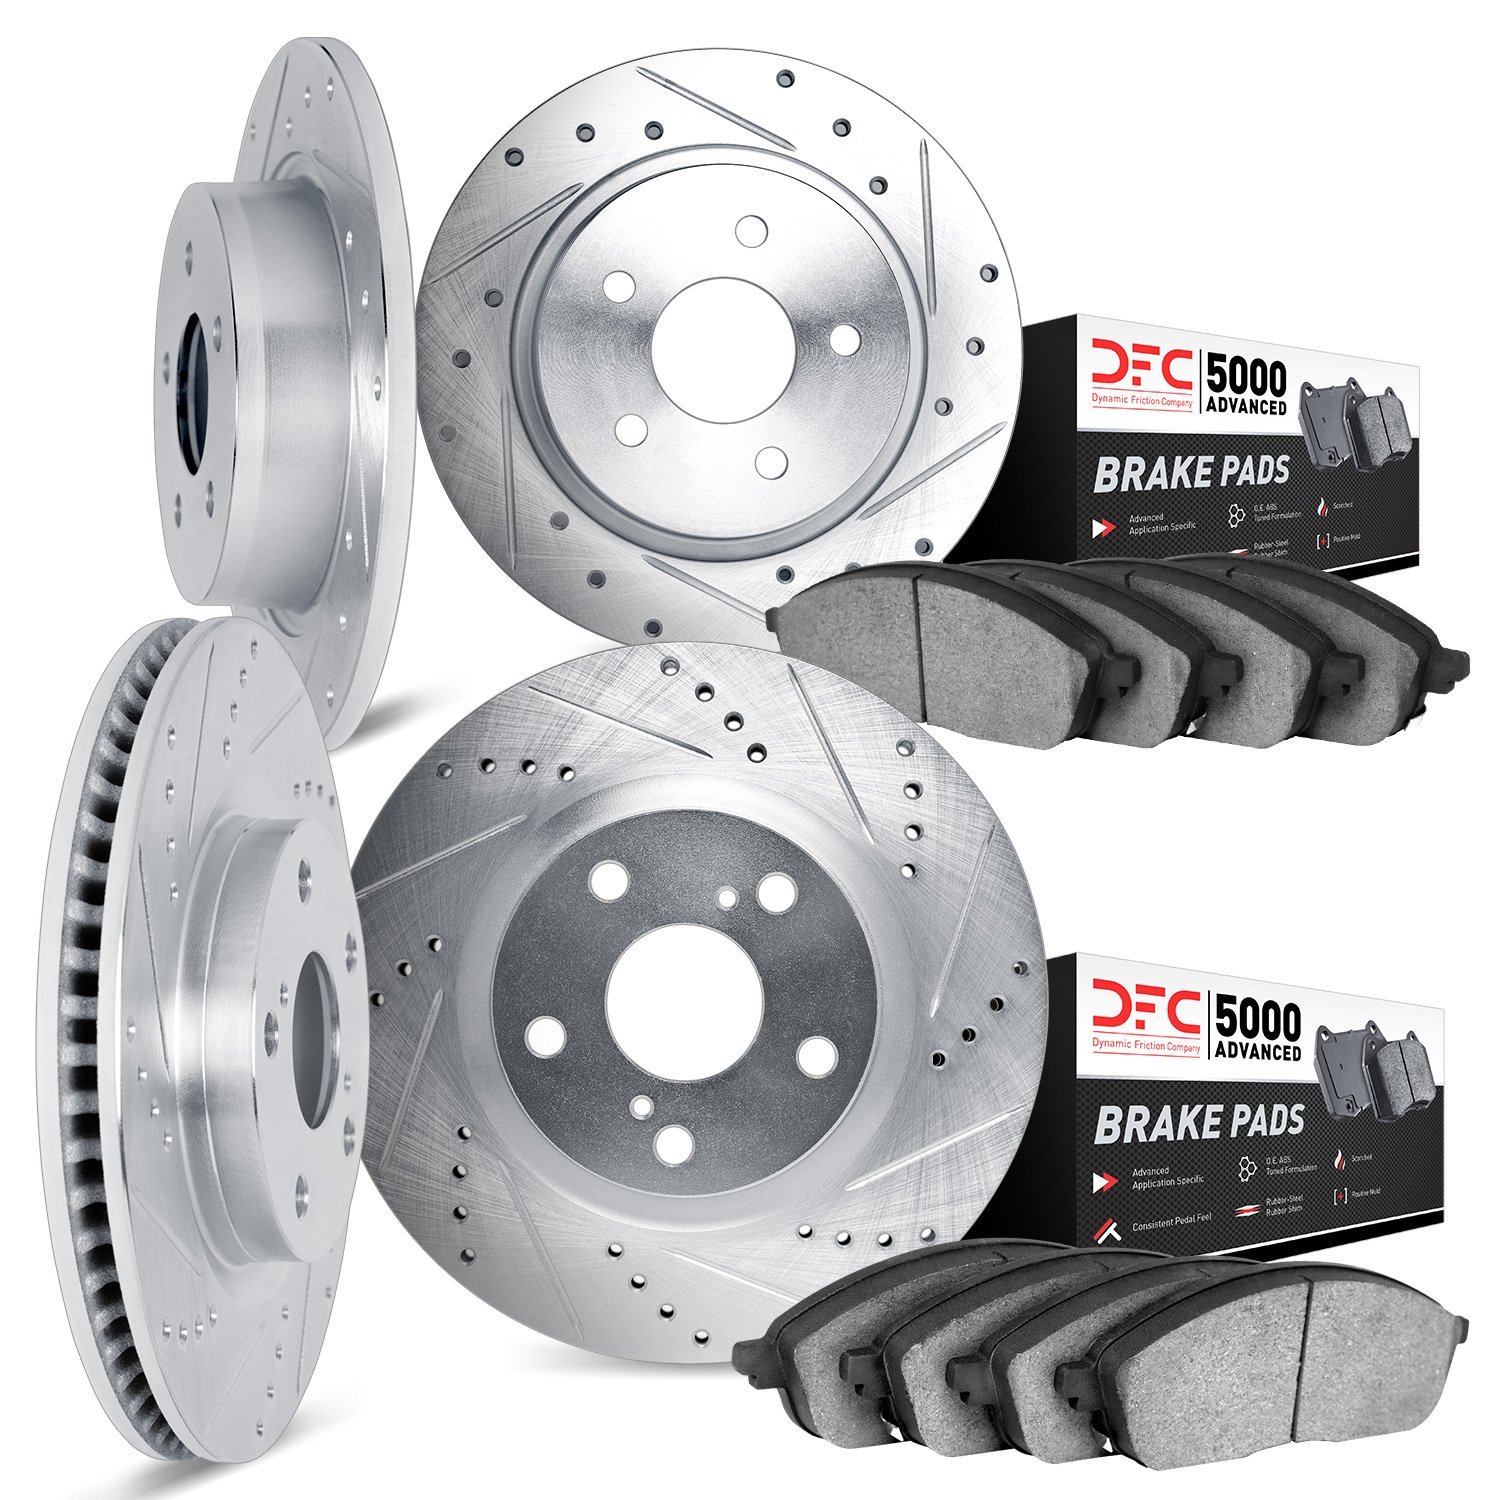 7504-80035 Drilled/Slotted Brake Rotors w/5000 Advanced Brake Pads Kit [Silver], 2001-2002 Ford/Lincoln/Mercury/Mazda, Position: